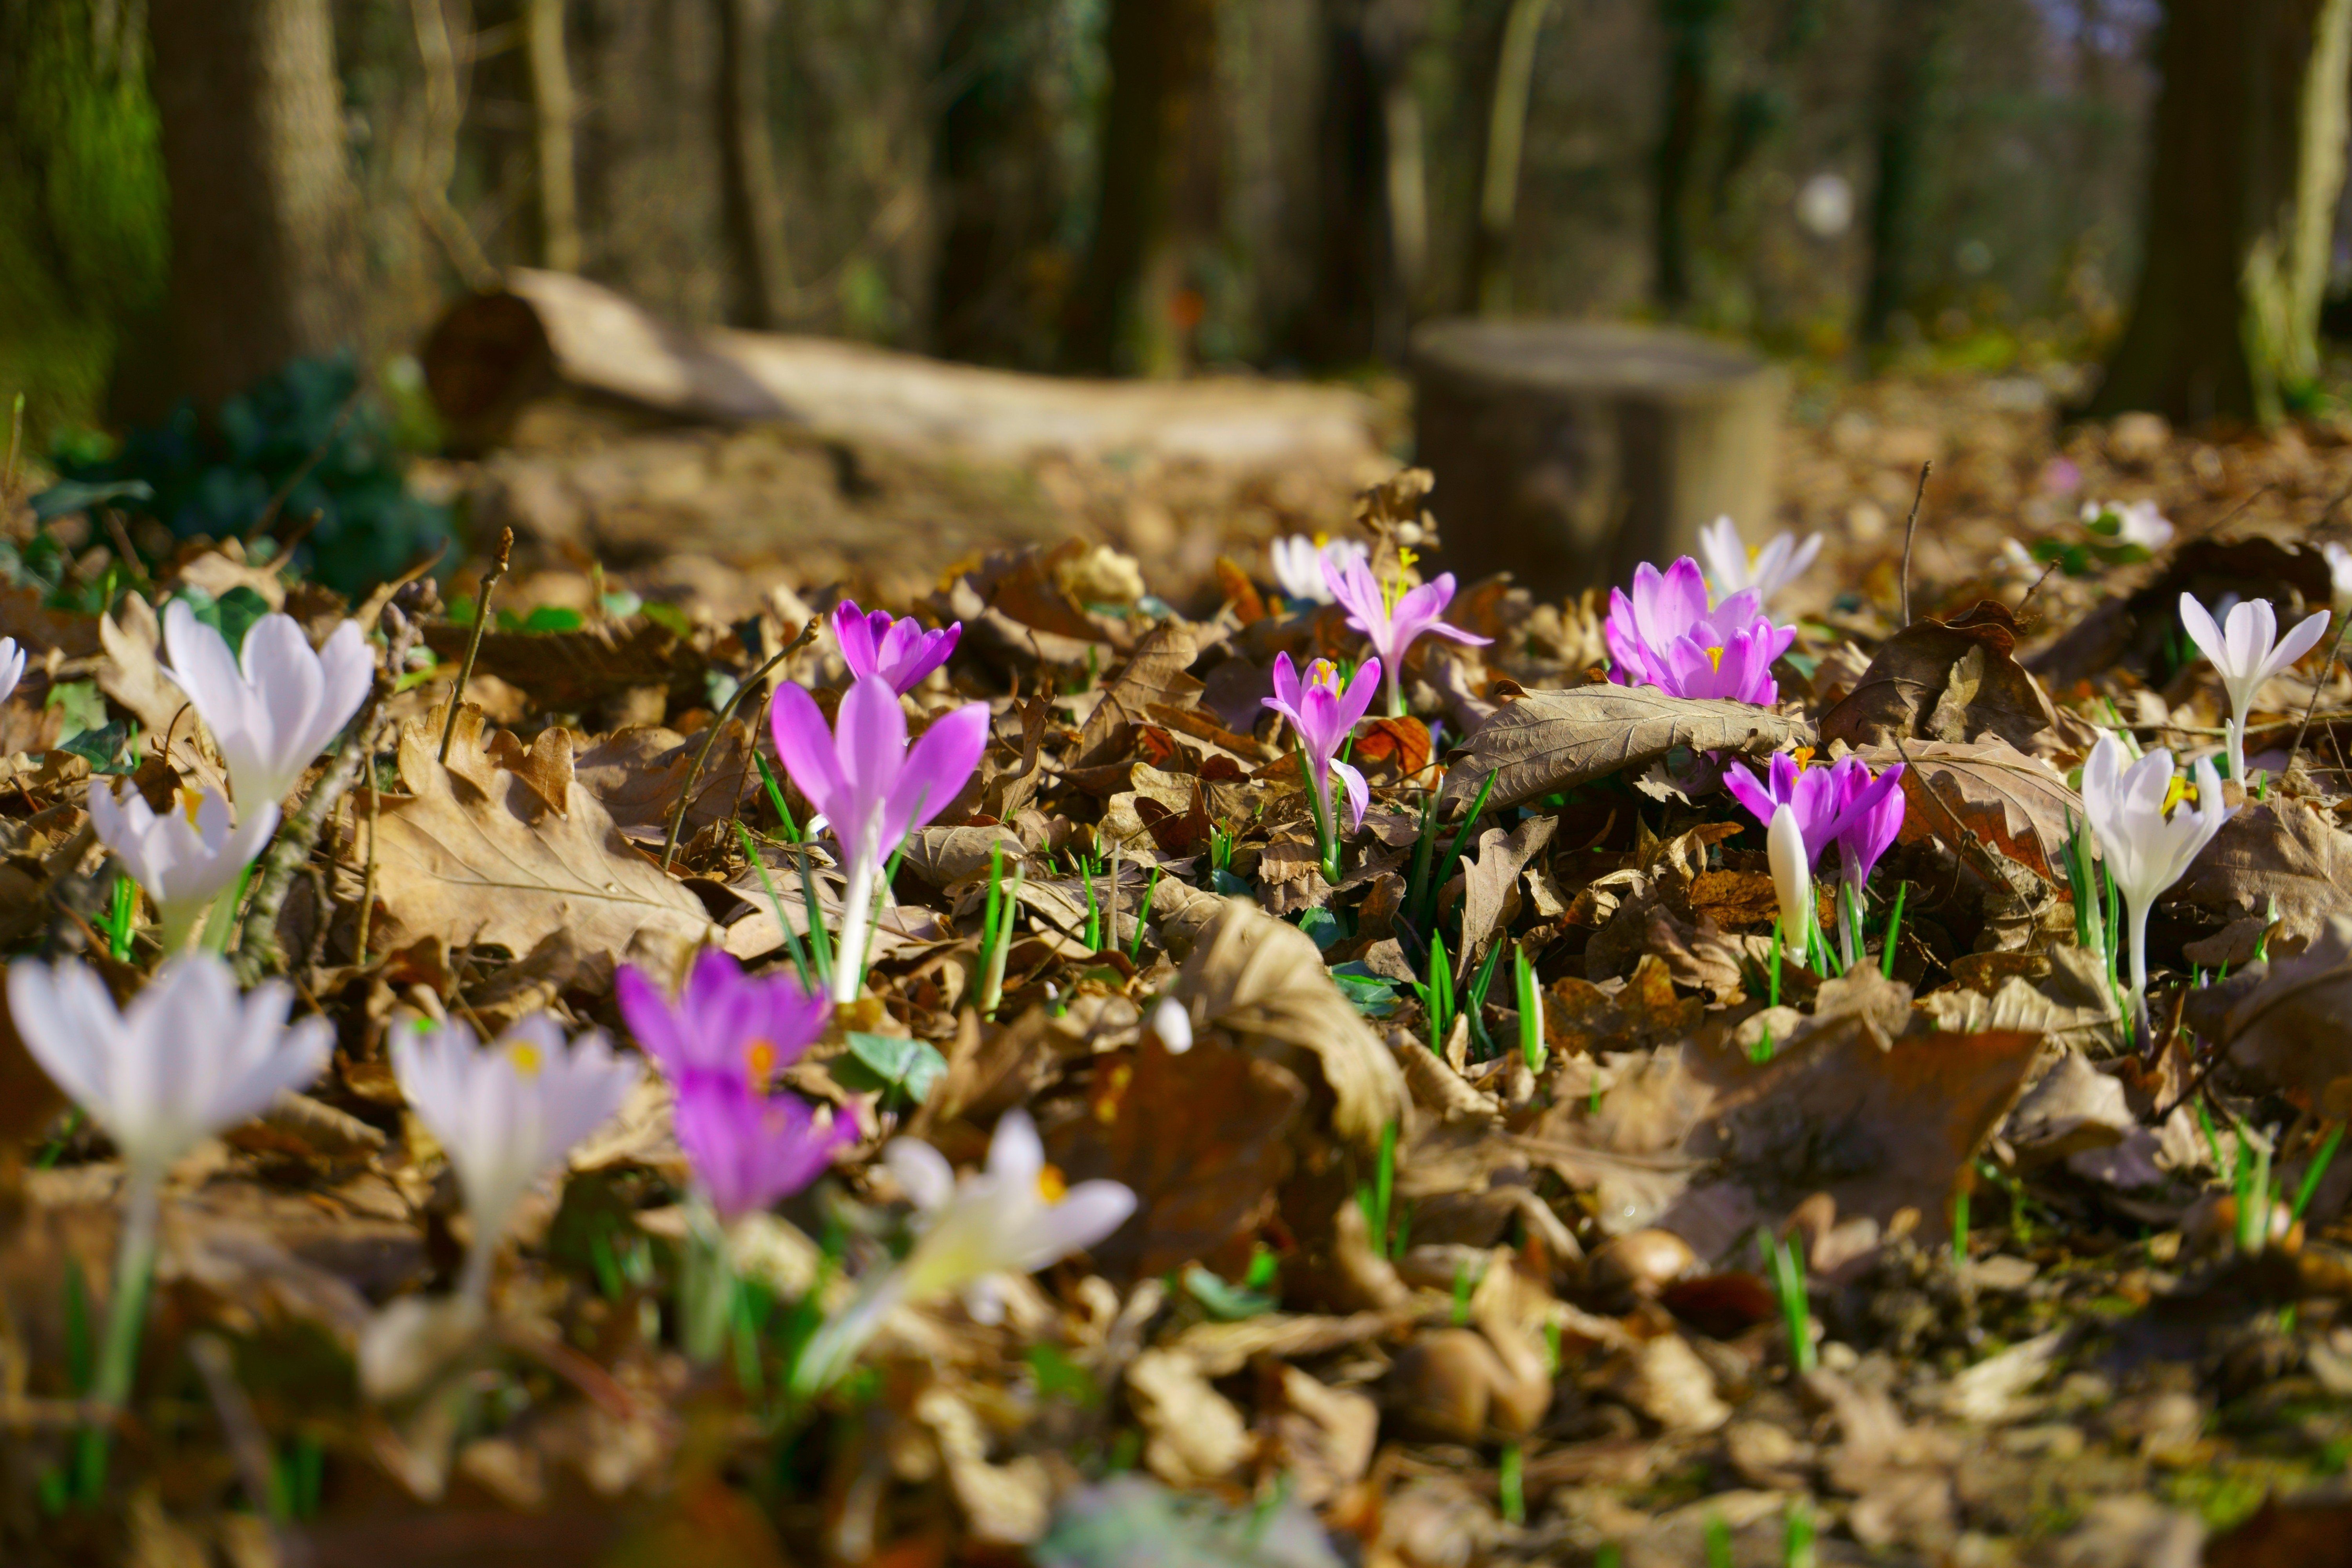 Wallpaper, 6000x4000 px, flowers, forest, spring 6000x4000